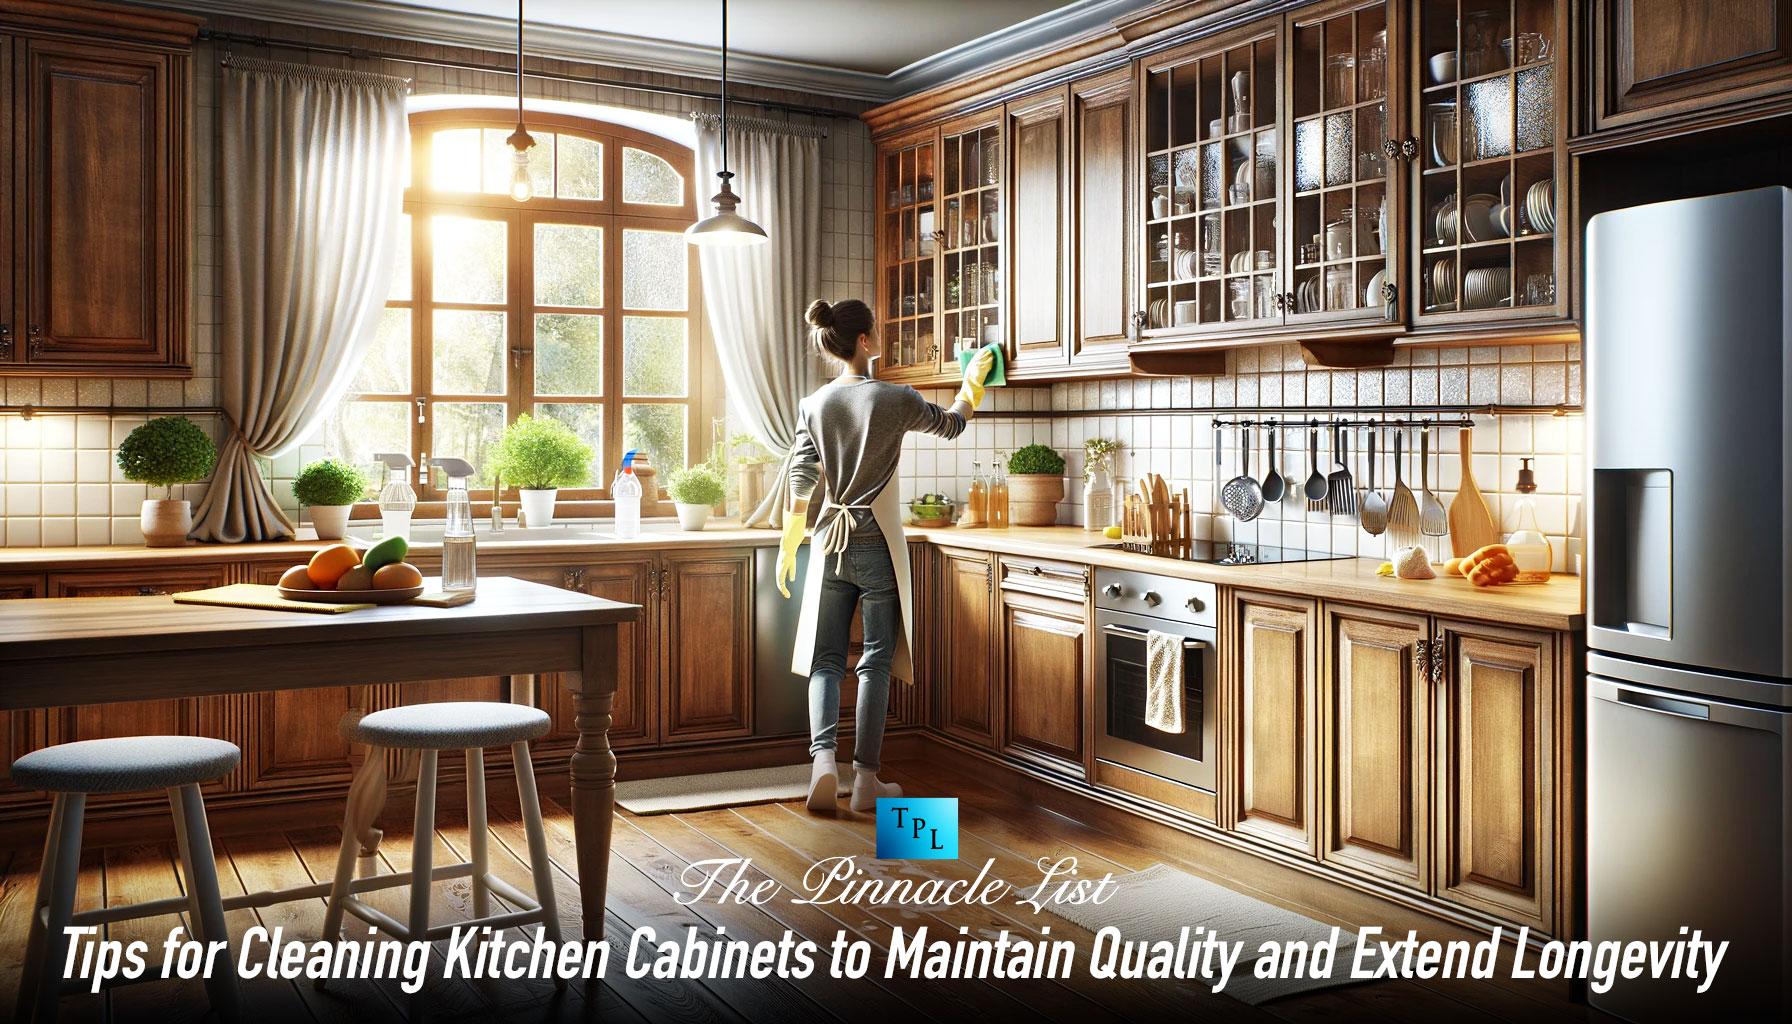 Tips for Cleaning Kitchen Cabinets to Maintain Quality and Extend Longevity